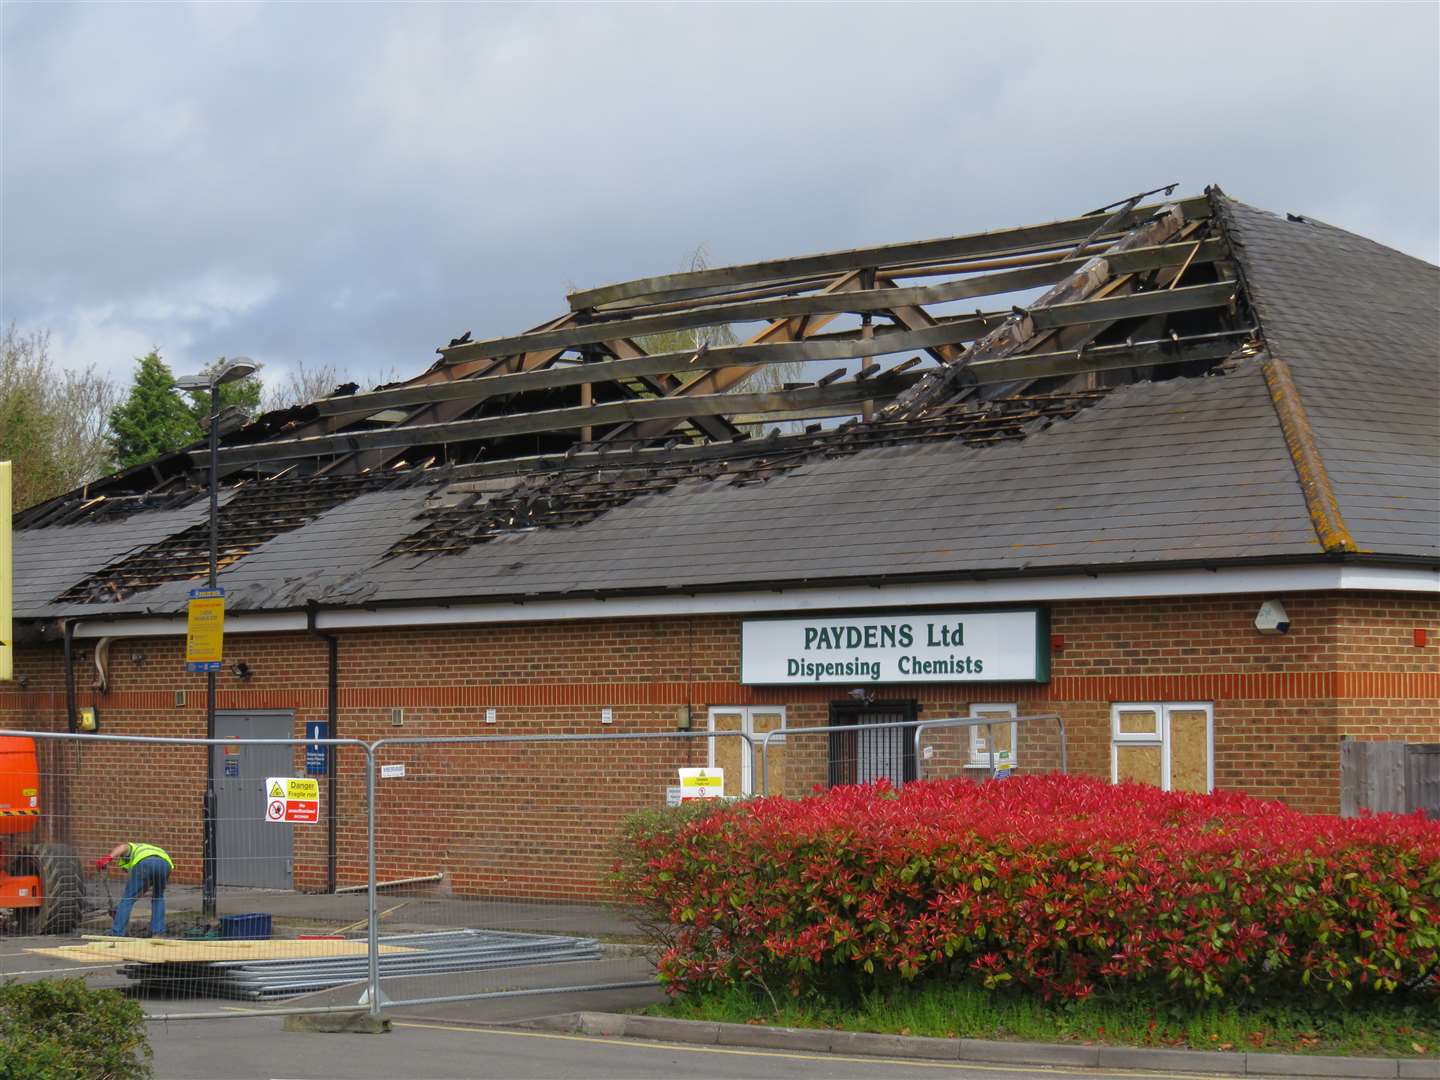 The badly damaged roof of the fire-damaged Tesco Express store Picture: Andy Clark